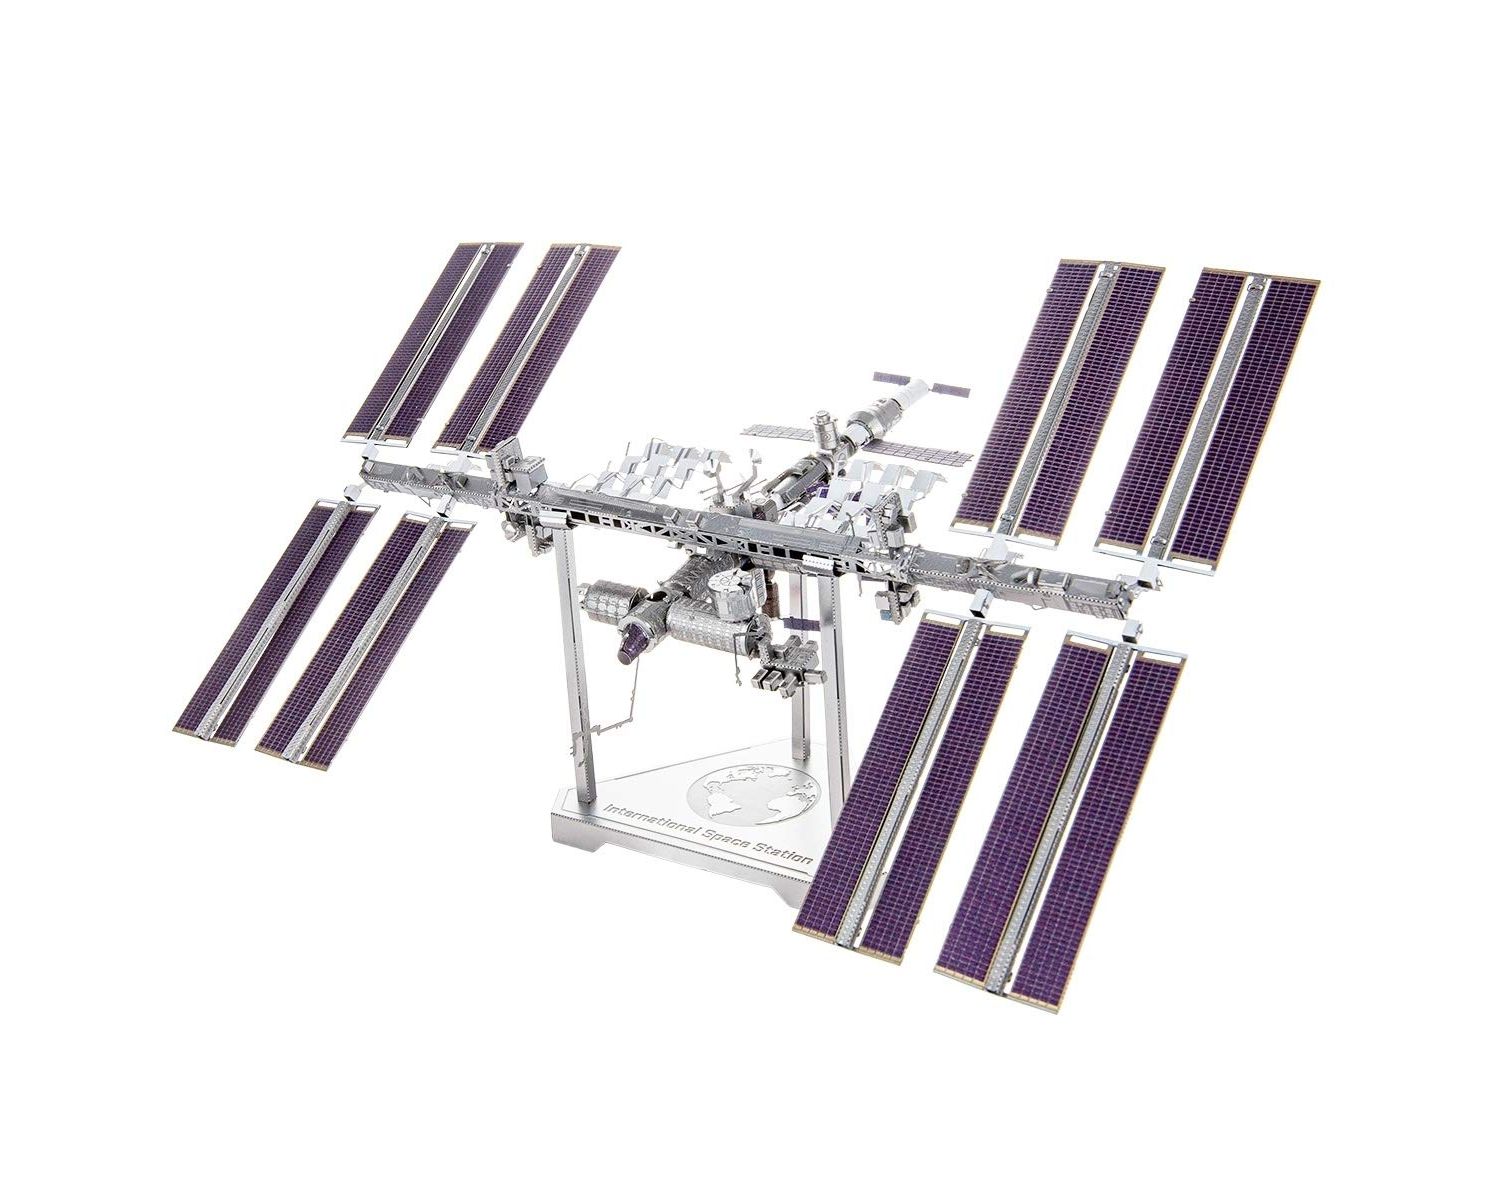 Space Station Model Review: A Detailed Analysis